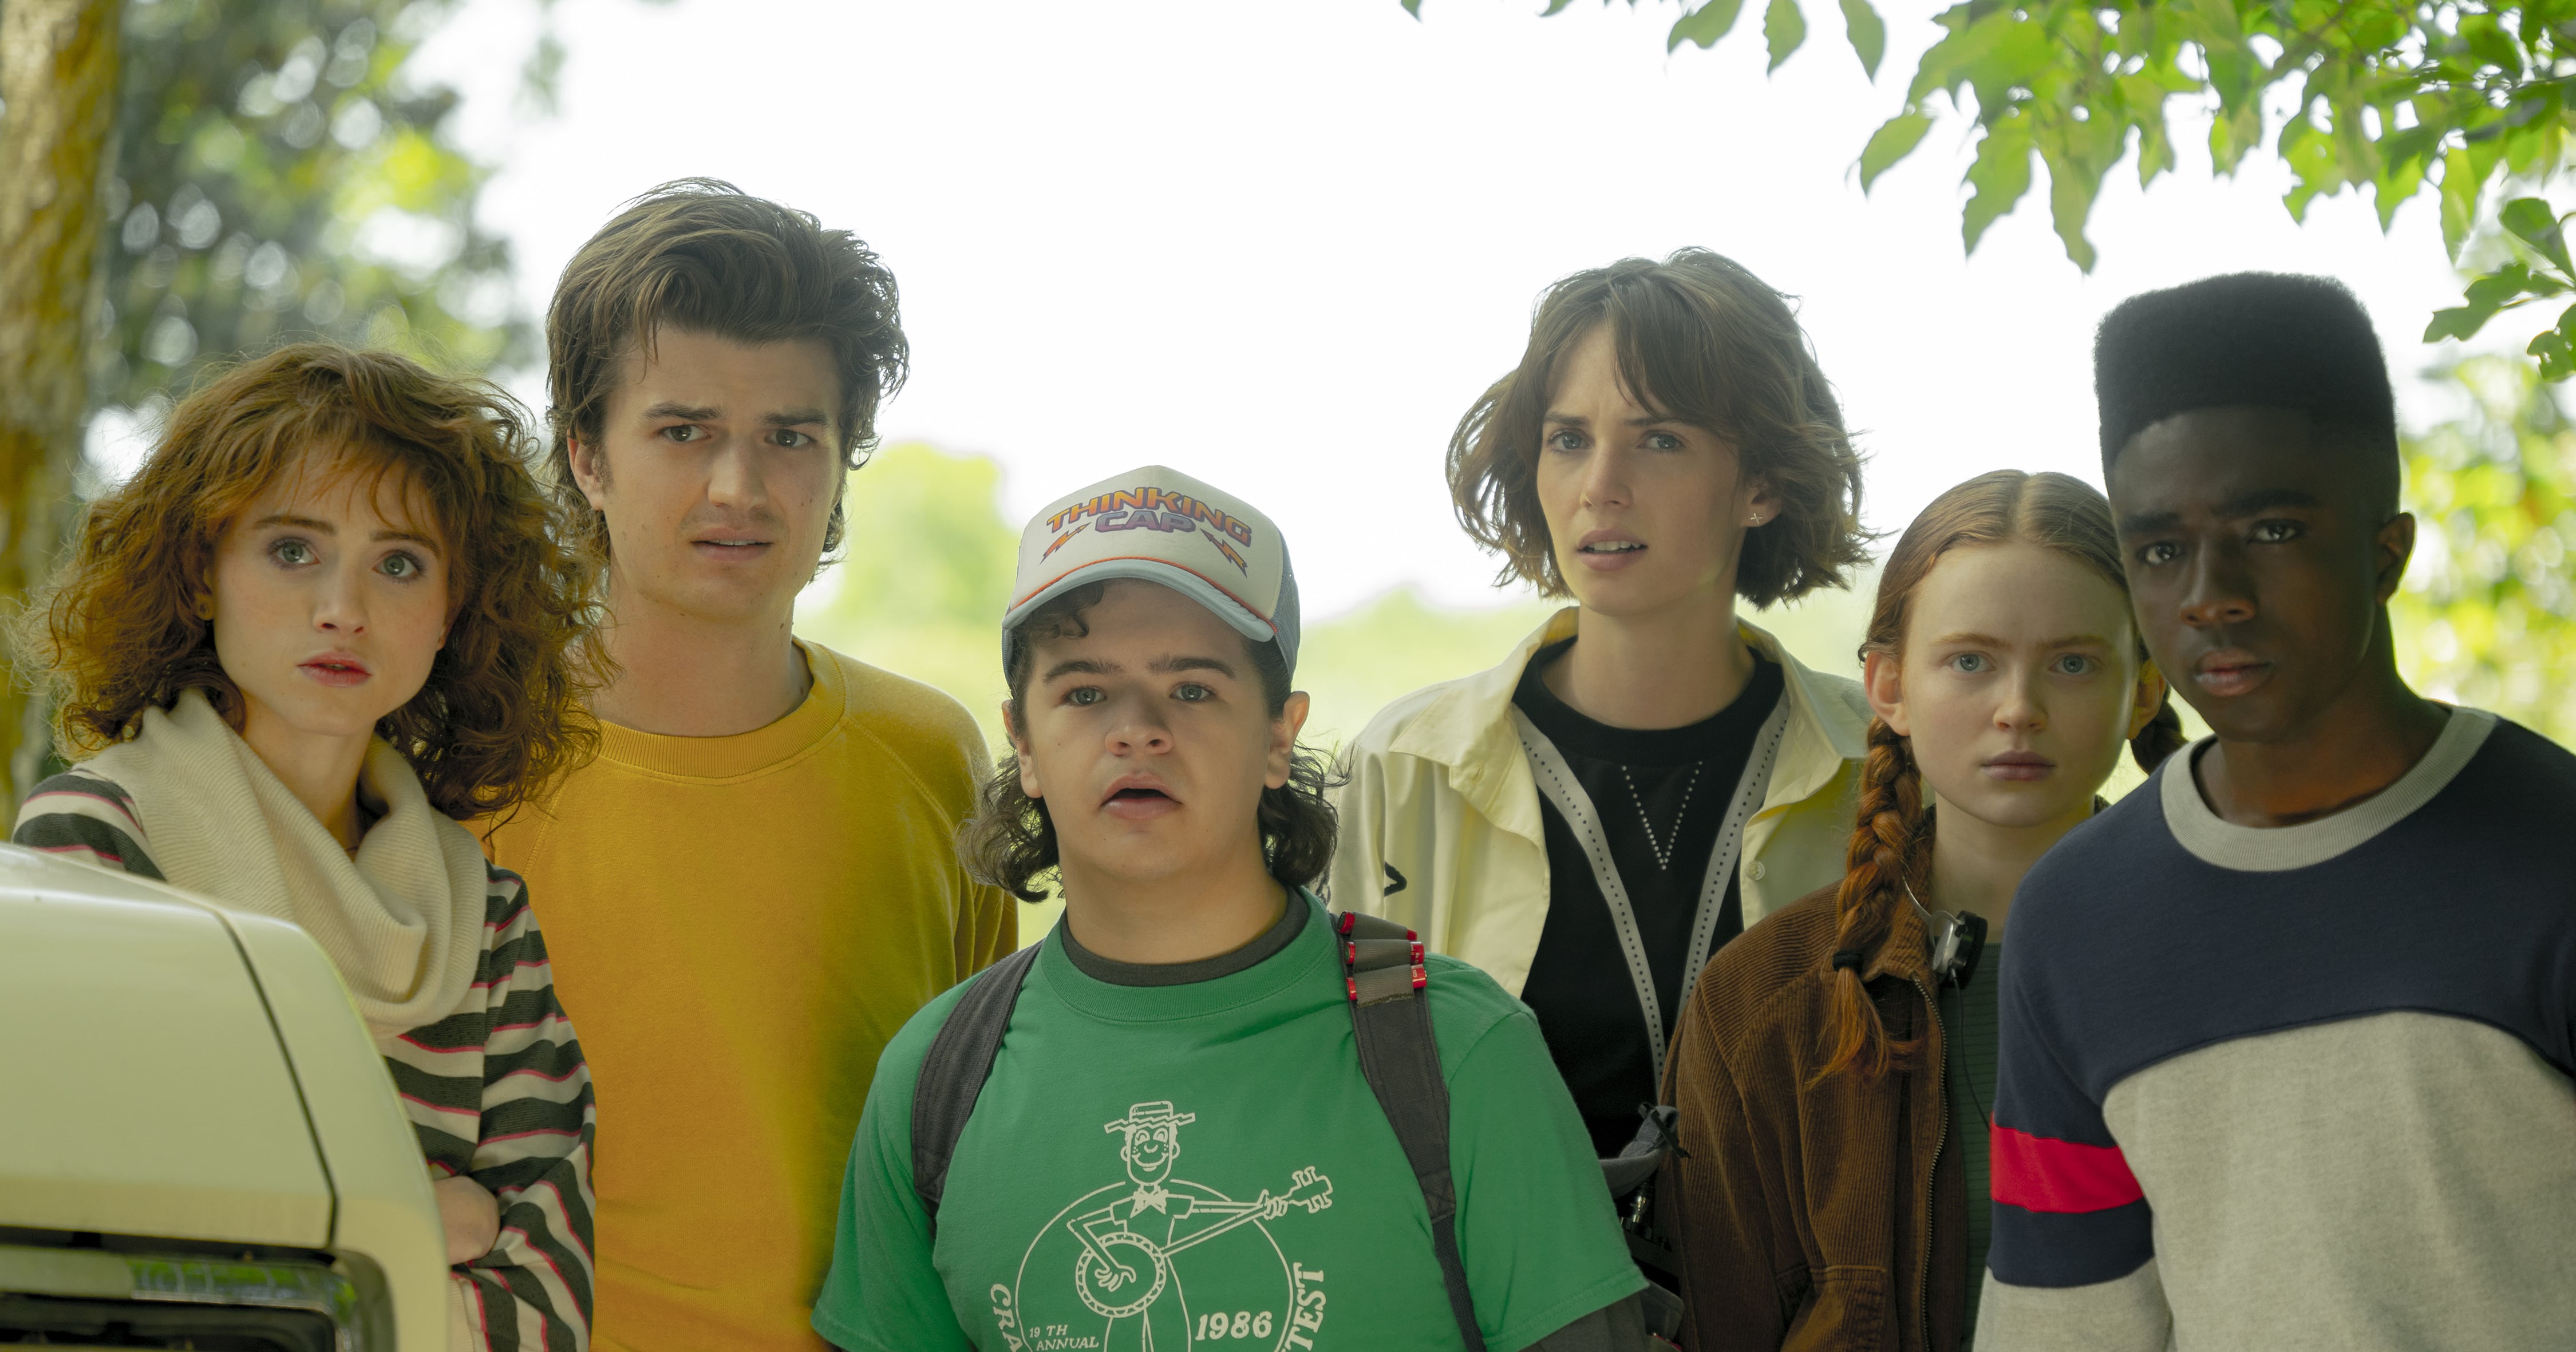 Stranger Things Review: We Need to Talk About Will - TV Fanatic